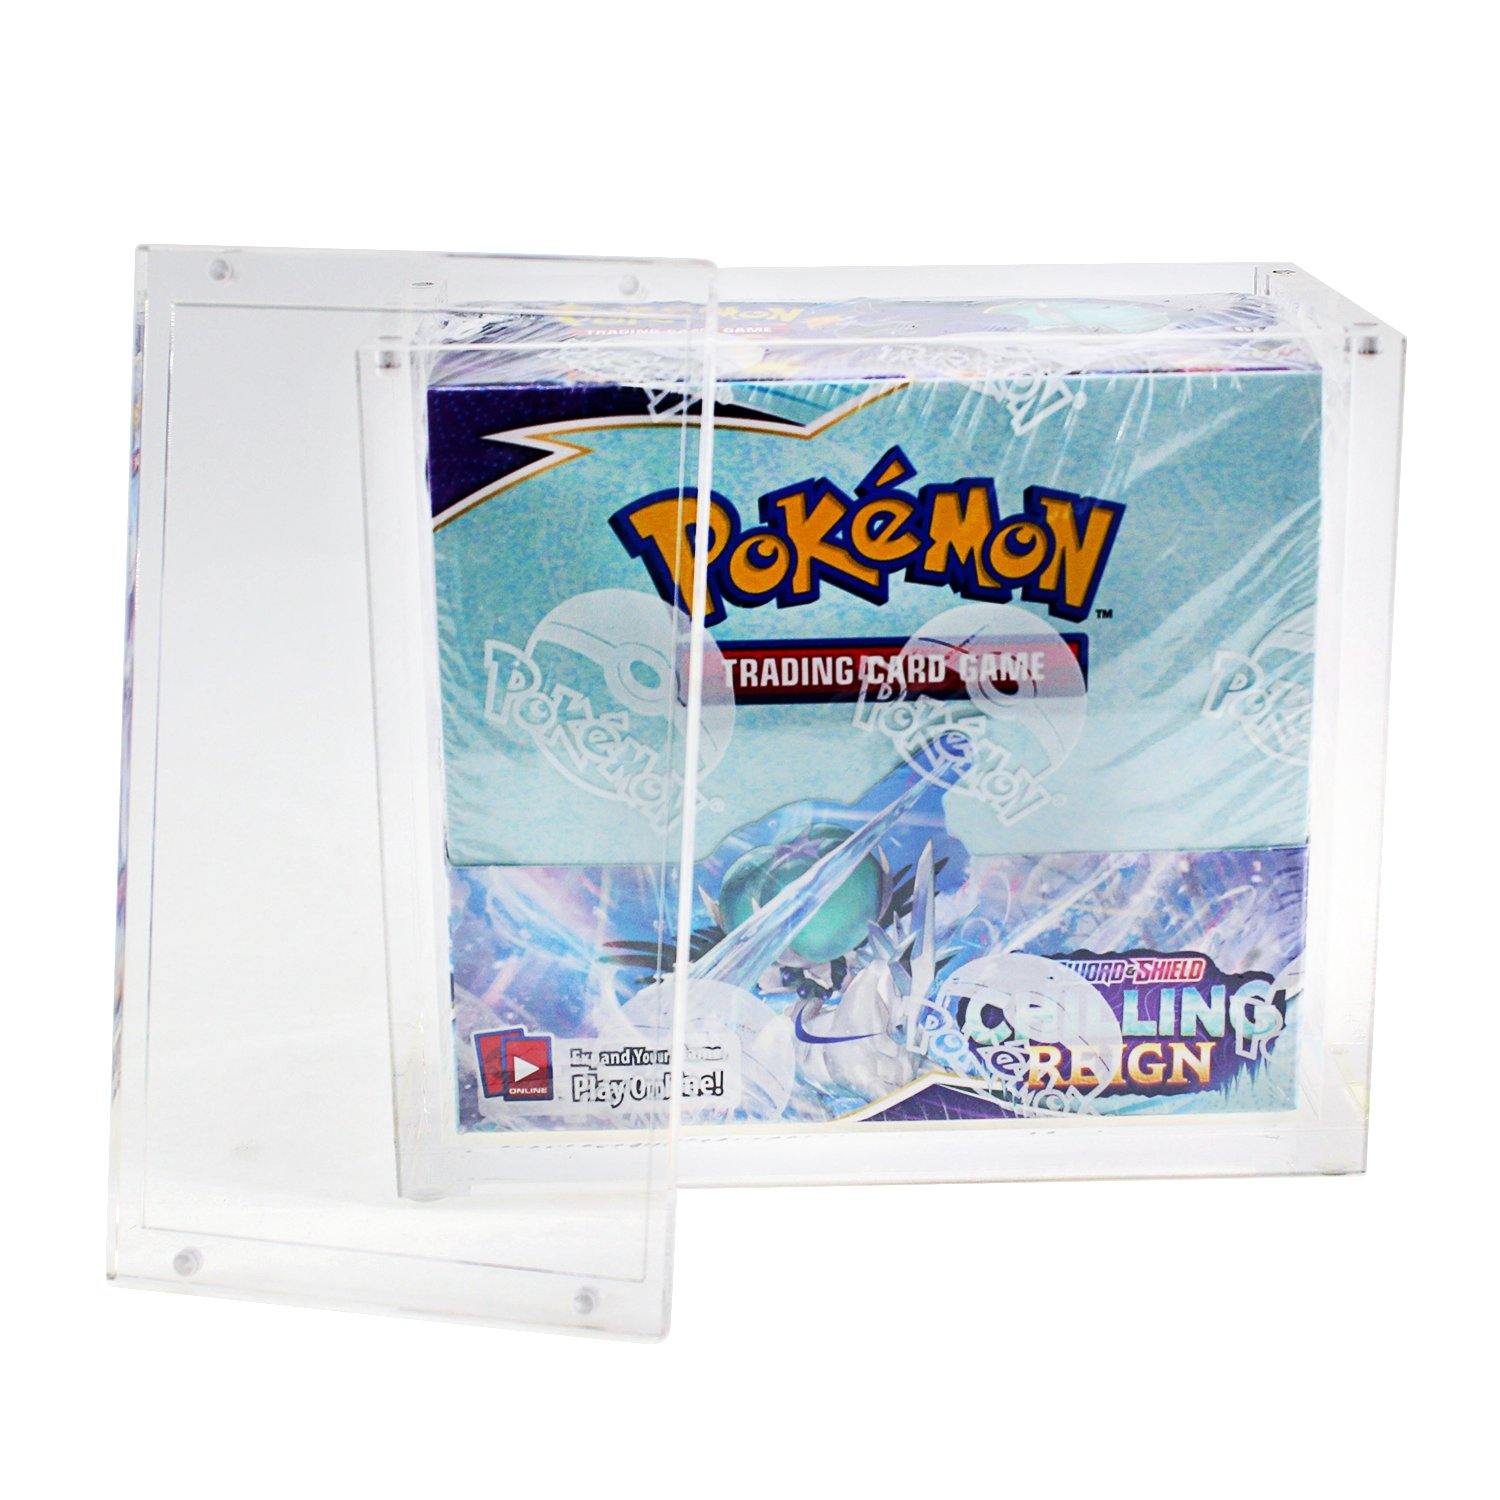 Acrylic Case for Pokemon Booster Box (8mm thick) - Wholesale